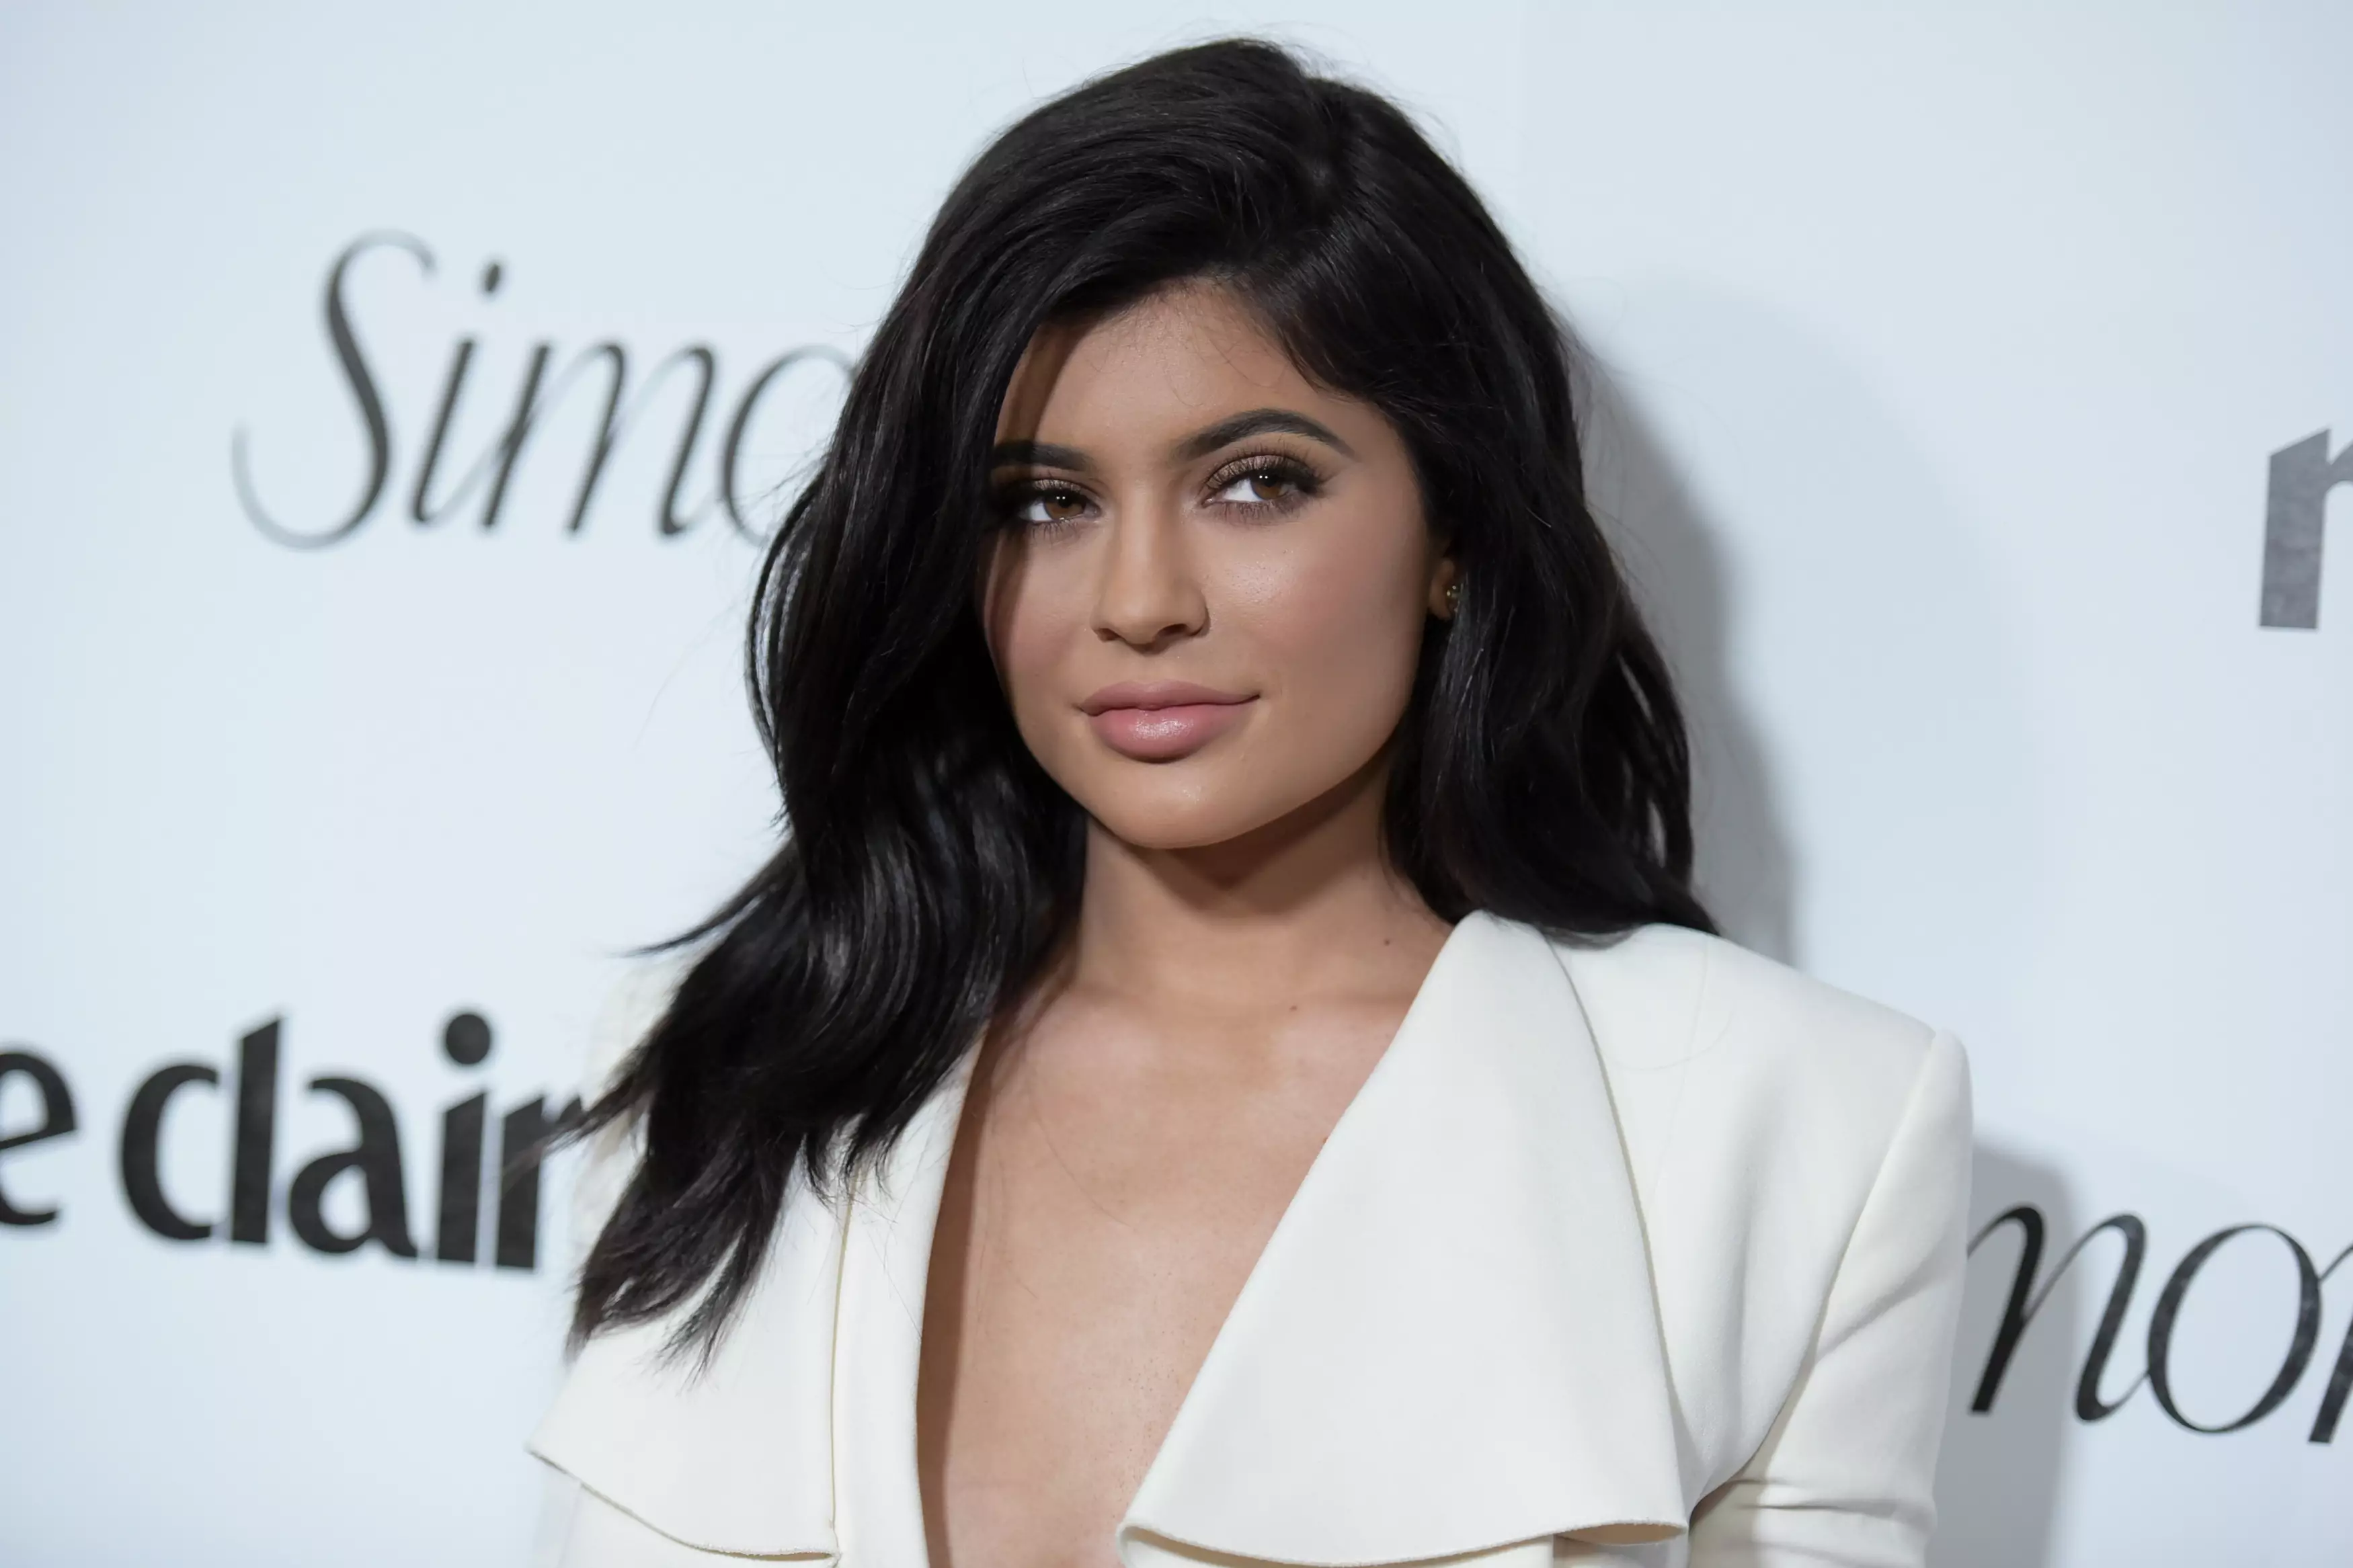 Kylie Jenner Bombarded With Texts And Calls After Brother Rob Tweeted Her Number